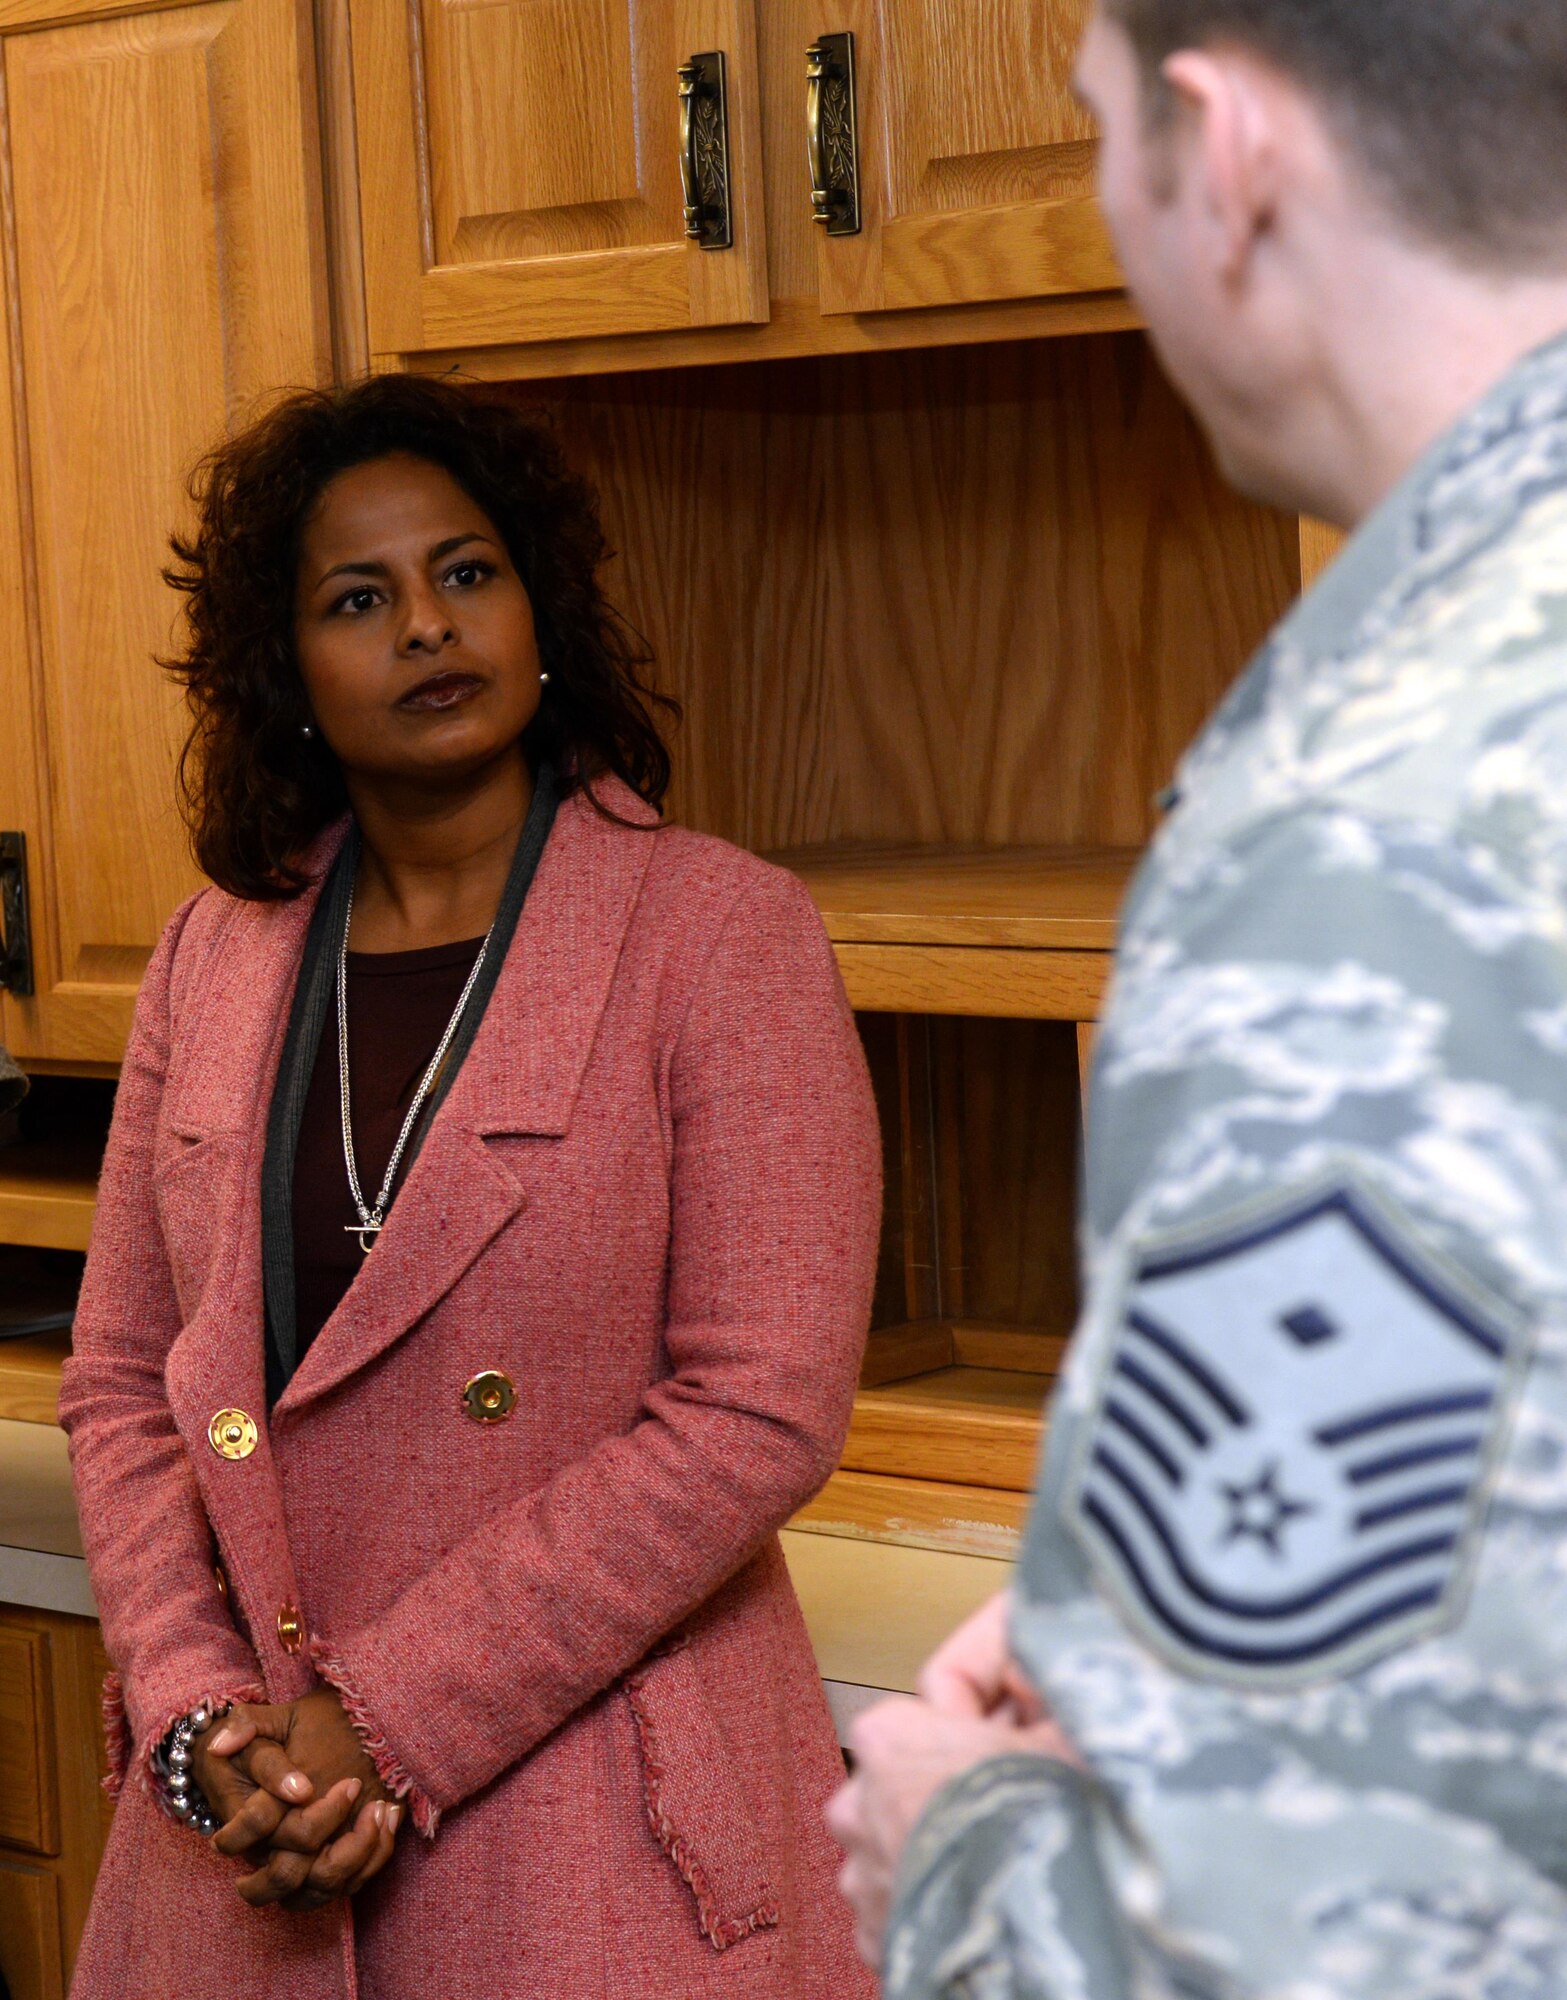 Amy Clark, spouse of Maj. Gen. Richard Clark, Eighth Air Force commander, left, receives a tour of the Diamond Mart by Master Sgt. Christopher Davidson, 432nd Attack Squadron first sergeant, at Ellsworth Air Force Base, S.D., Jan. 19, 2016. The Diamond Mart was established by the First Sergeant Council as a way to help provide Airmen uniforms and clothing to replace their damaged or unserviceable ones, free of charge. (U.S. Air Force photo by Airman Donald C. Knechtel/Released)